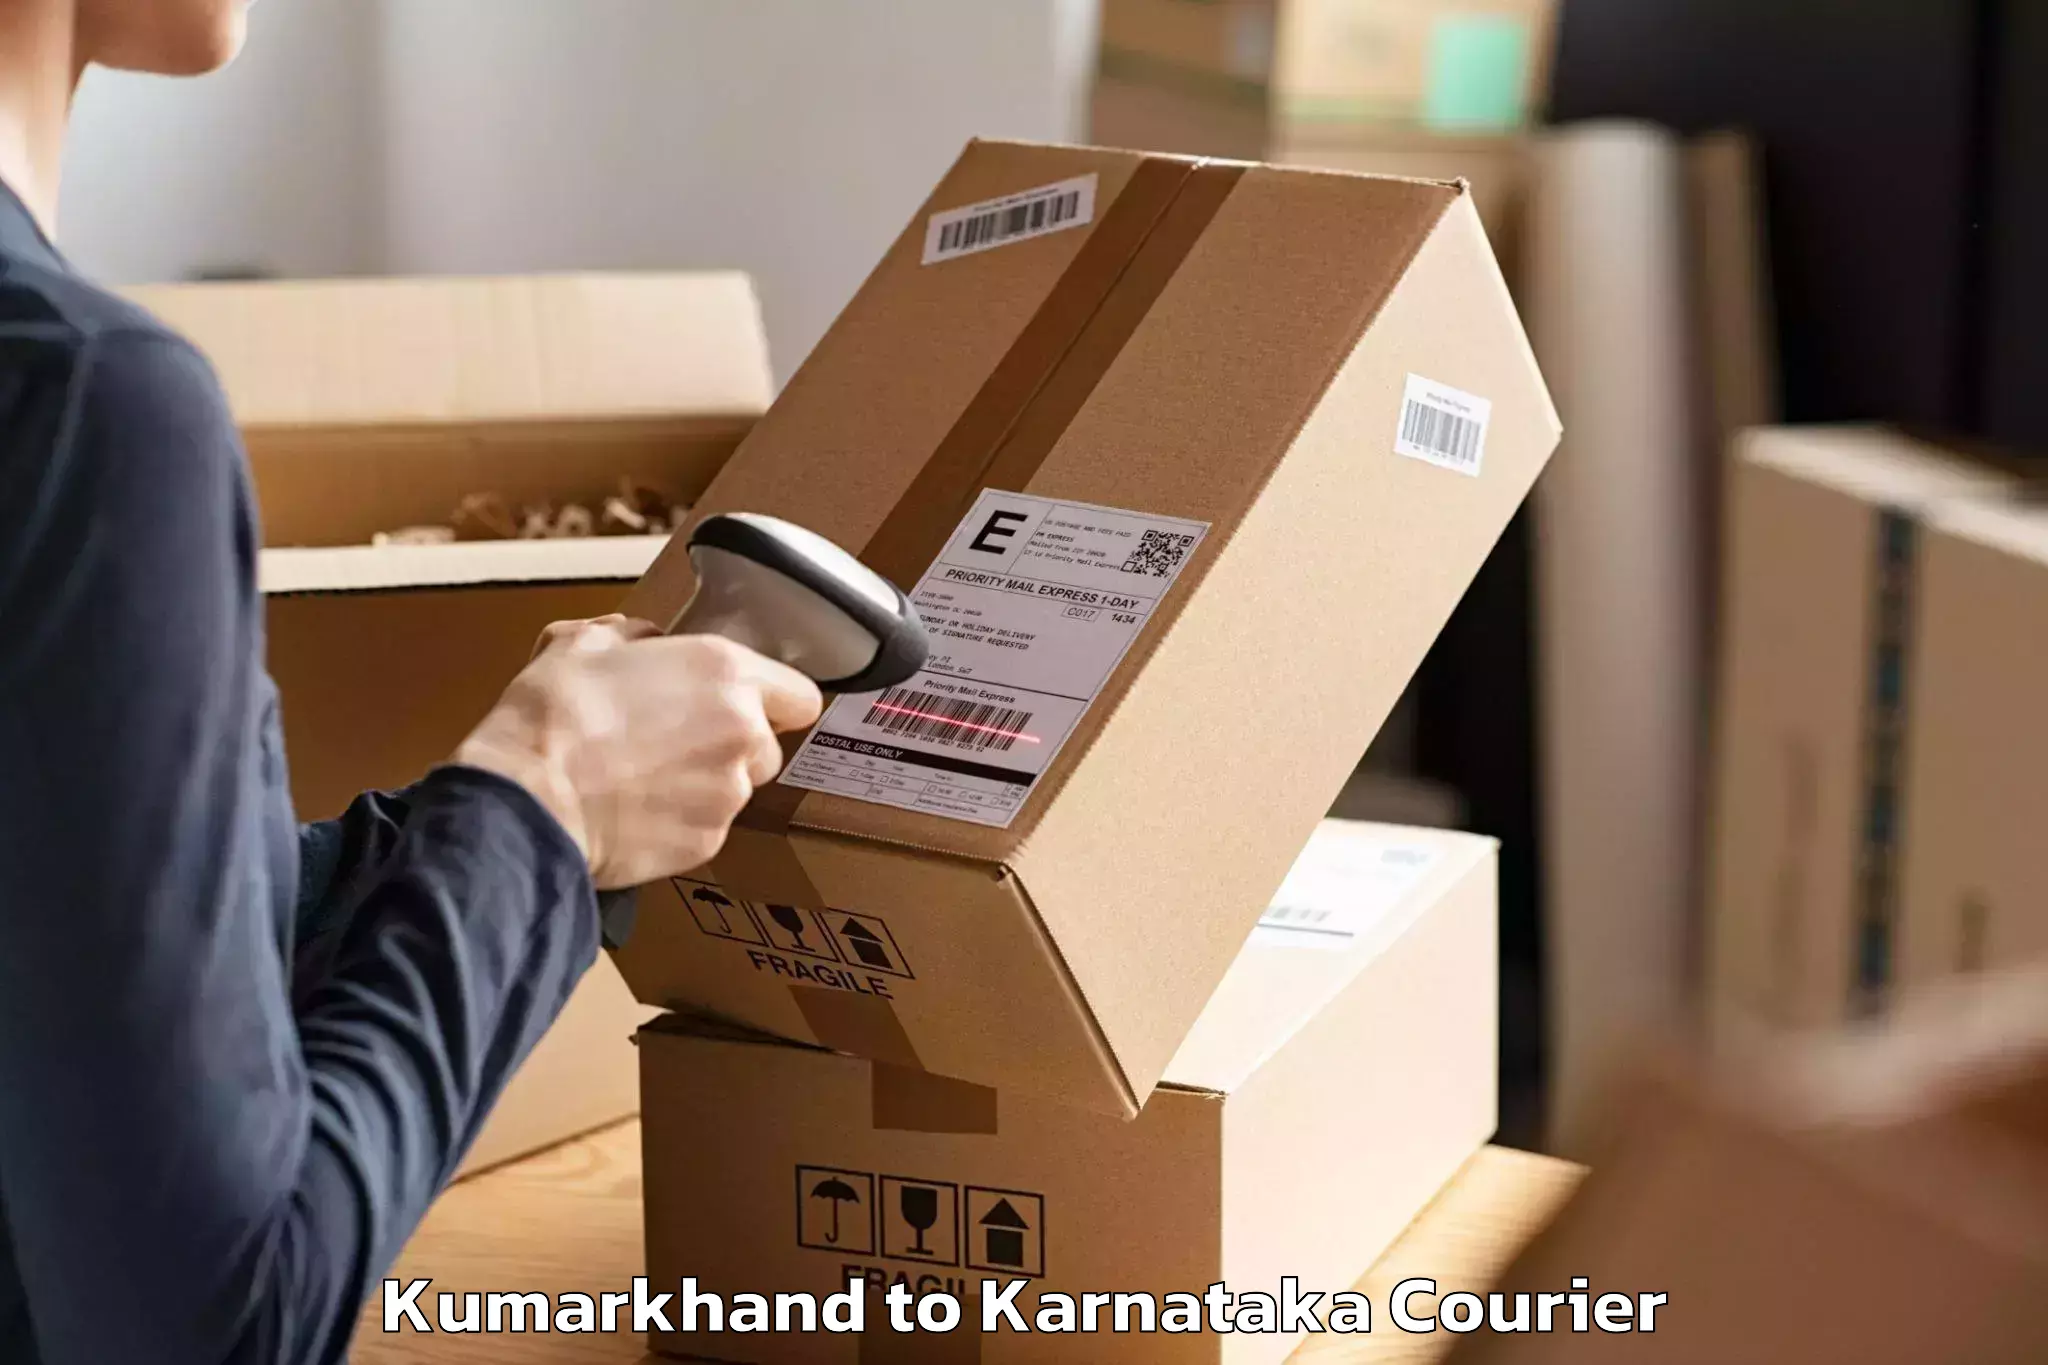 Furniture delivery service Kumarkhand to Yellare